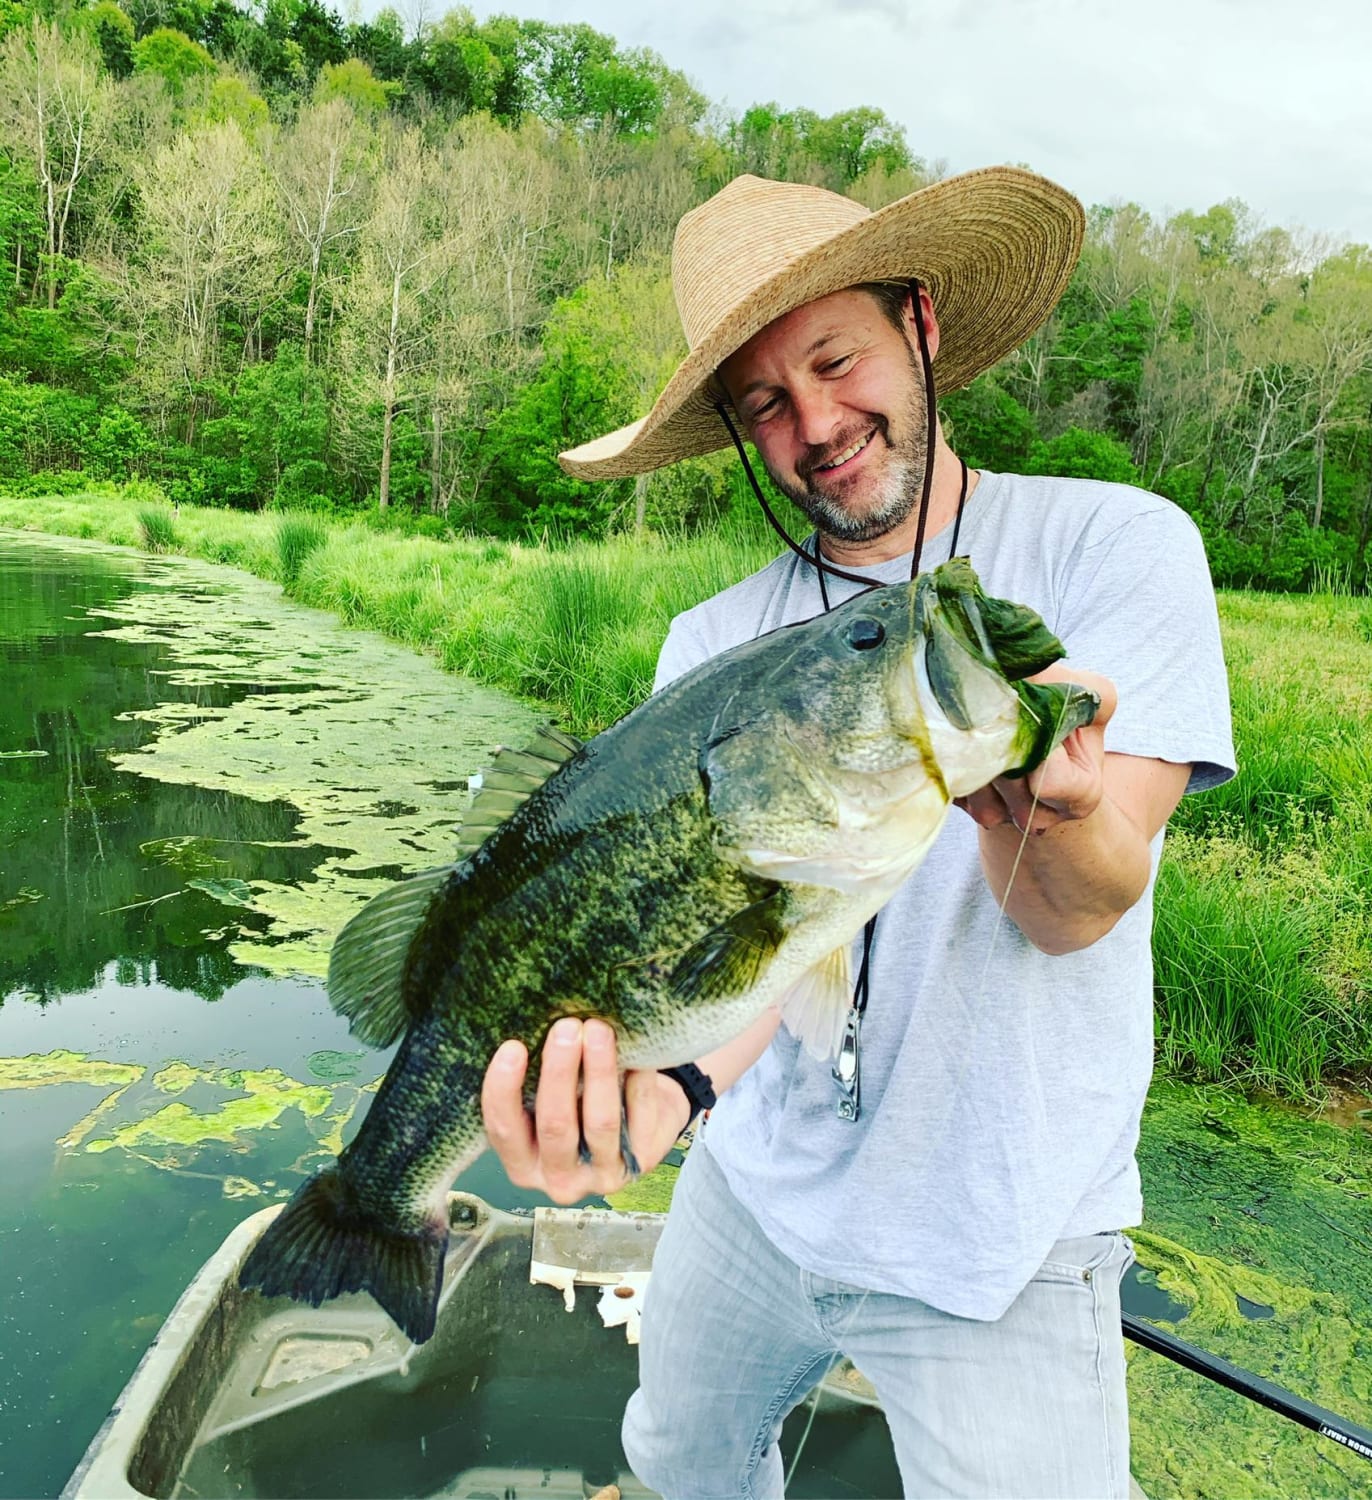 Arkansas black beauty! Been fishing for 30+ years without a scale. Doh! Definitely a PB. Guess I’ll be getting a scale now. Ha